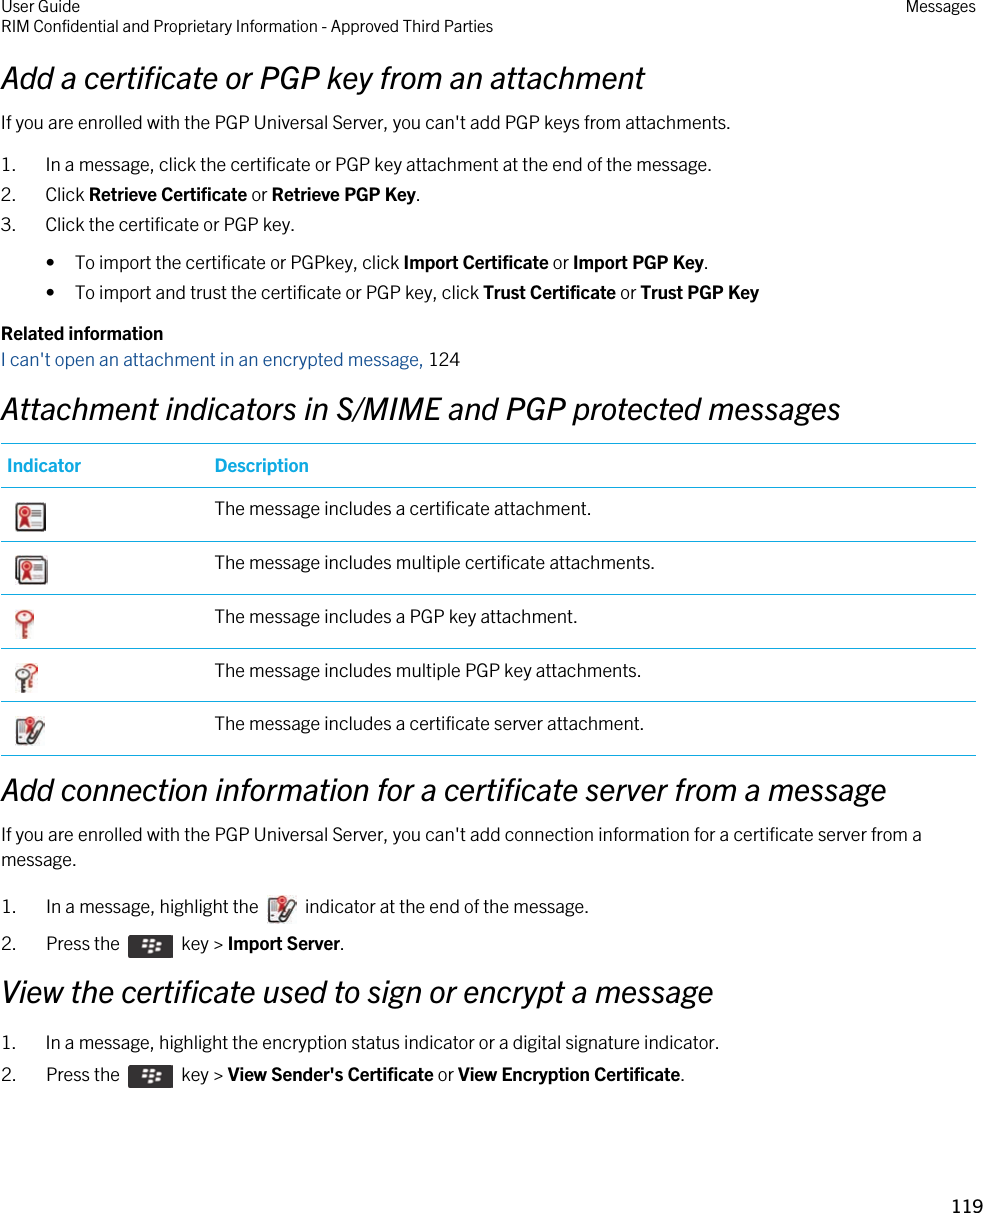 Add a certificate or PGP key from an attachmentIf you are enrolled with the PGP Universal Server, you can&apos;t add PGP keys from attachments.1. In a message, click the certificate or PGP key attachment at the end of the message.2. Click Retrieve Certificate or Retrieve PGP Key.3. Click the certificate or PGP key.• To import the certificate or PGPkey, click Import Certificate or Import PGP Key.• To import and trust the certificate or PGP key, click Trust Certificate or Trust PGP KeyRelated informationI can&apos;t open an attachment in an encrypted message, 124Attachment indicators in S/MIME and PGP protected messagesIndicator Description The message includes a certificate attachment. The message includes multiple certificate attachments. The message includes a PGP key attachment. The message includes multiple PGP key attachments. The message includes a certificate server attachment.Add connection information for a certificate server from a messageIf you are enrolled with the PGP Universal Server, you can&apos;t add connection information for a certificate server from a message.1.  In a message, highlight the    indicator at the end of the message. 2.  Press the    key &gt; Import Server. View the certificate used to sign or encrypt a message1. In a message, highlight the encryption status indicator or a digital signature indicator.2.  Press the    key &gt; View Sender&apos;s Certificate or View Encryption Certificate. User GuideRIM Confidential and Proprietary Information - Approved Third Parties Messages119 